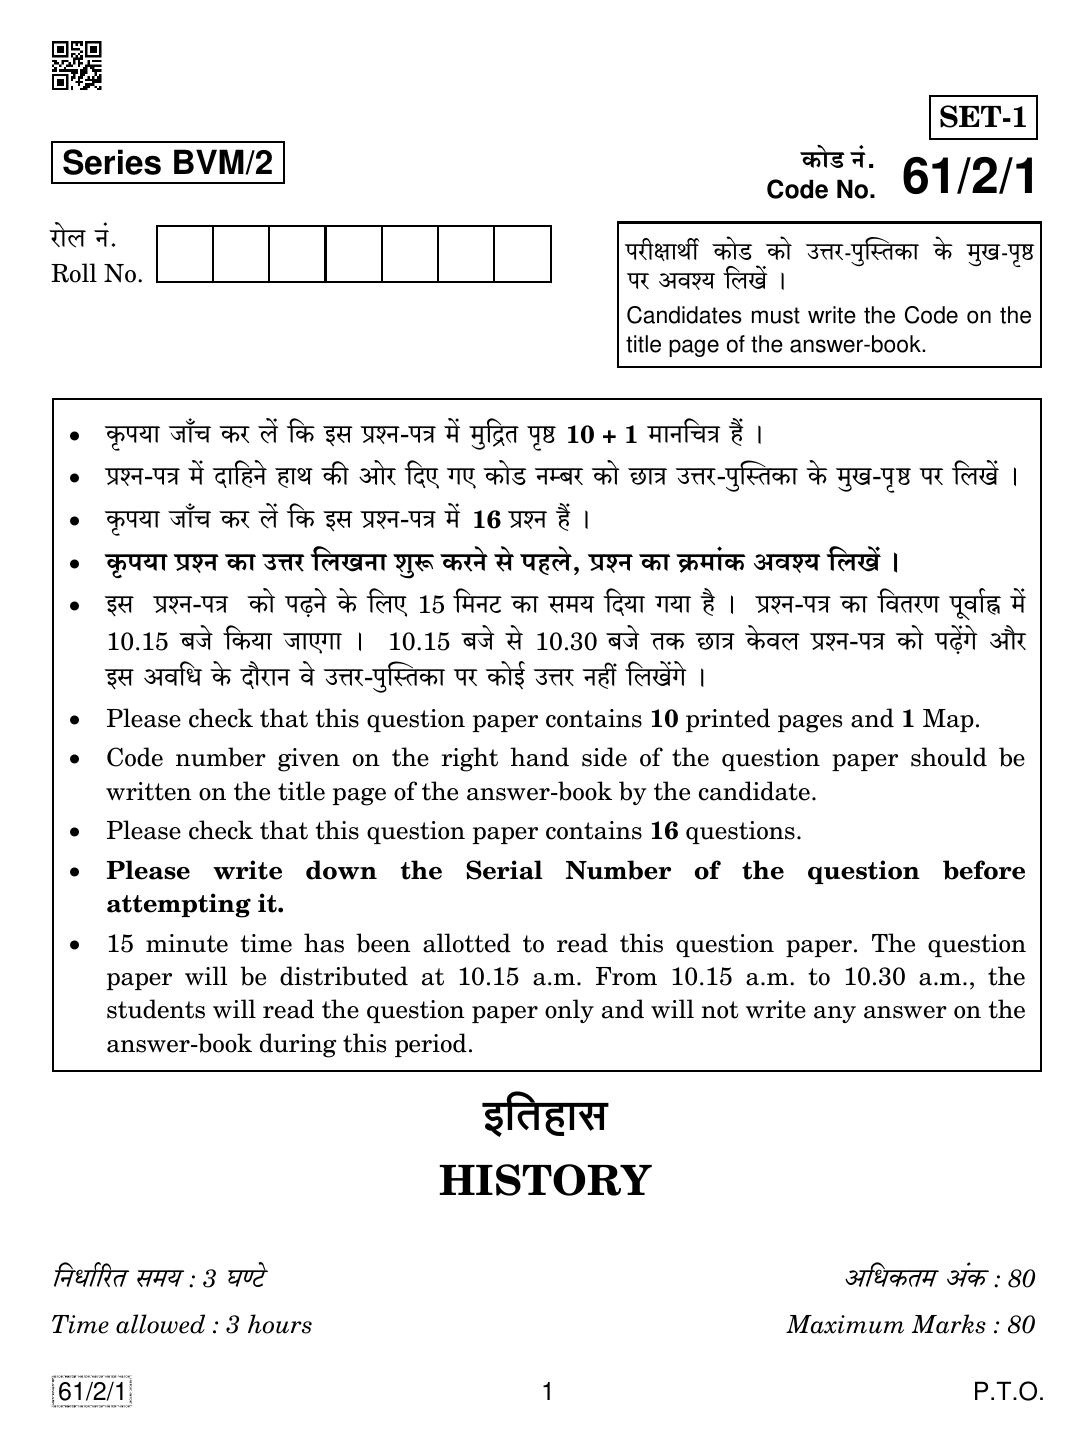 CBSE Class 12 61-2-1 History 2019 Question Paper - Page 1